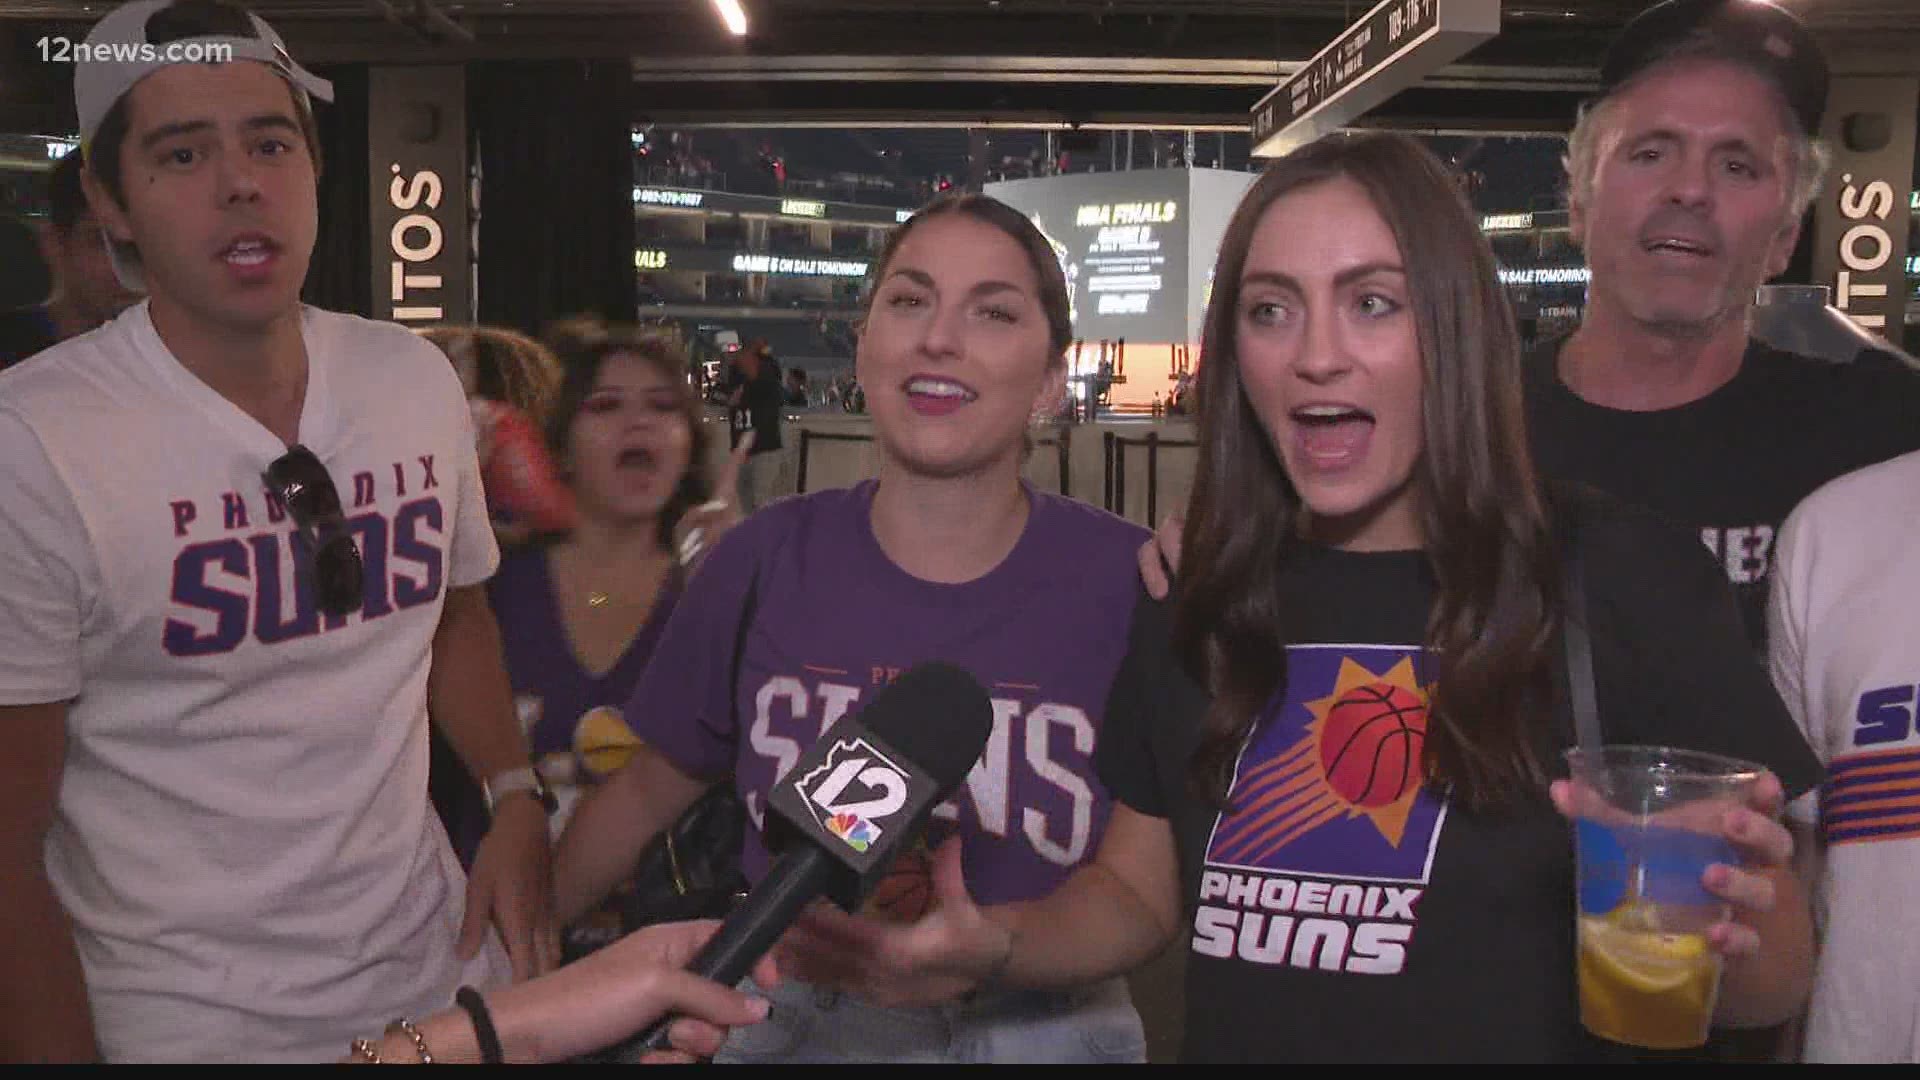 Fans were disappointed but optimistic knowing that the Suns could have the chance to close out the series with a win at home.